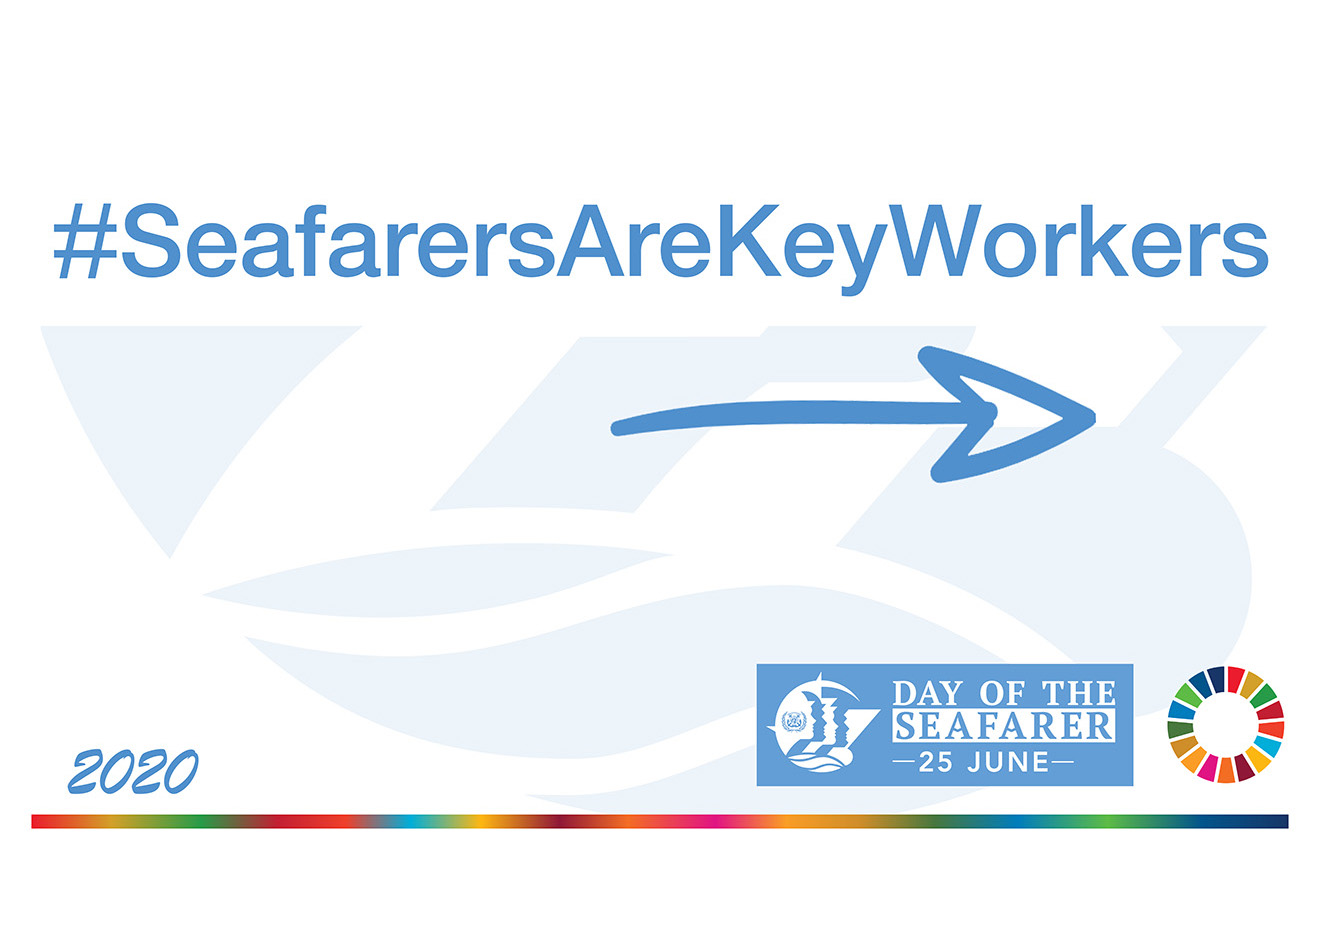 Seafarers are key workers